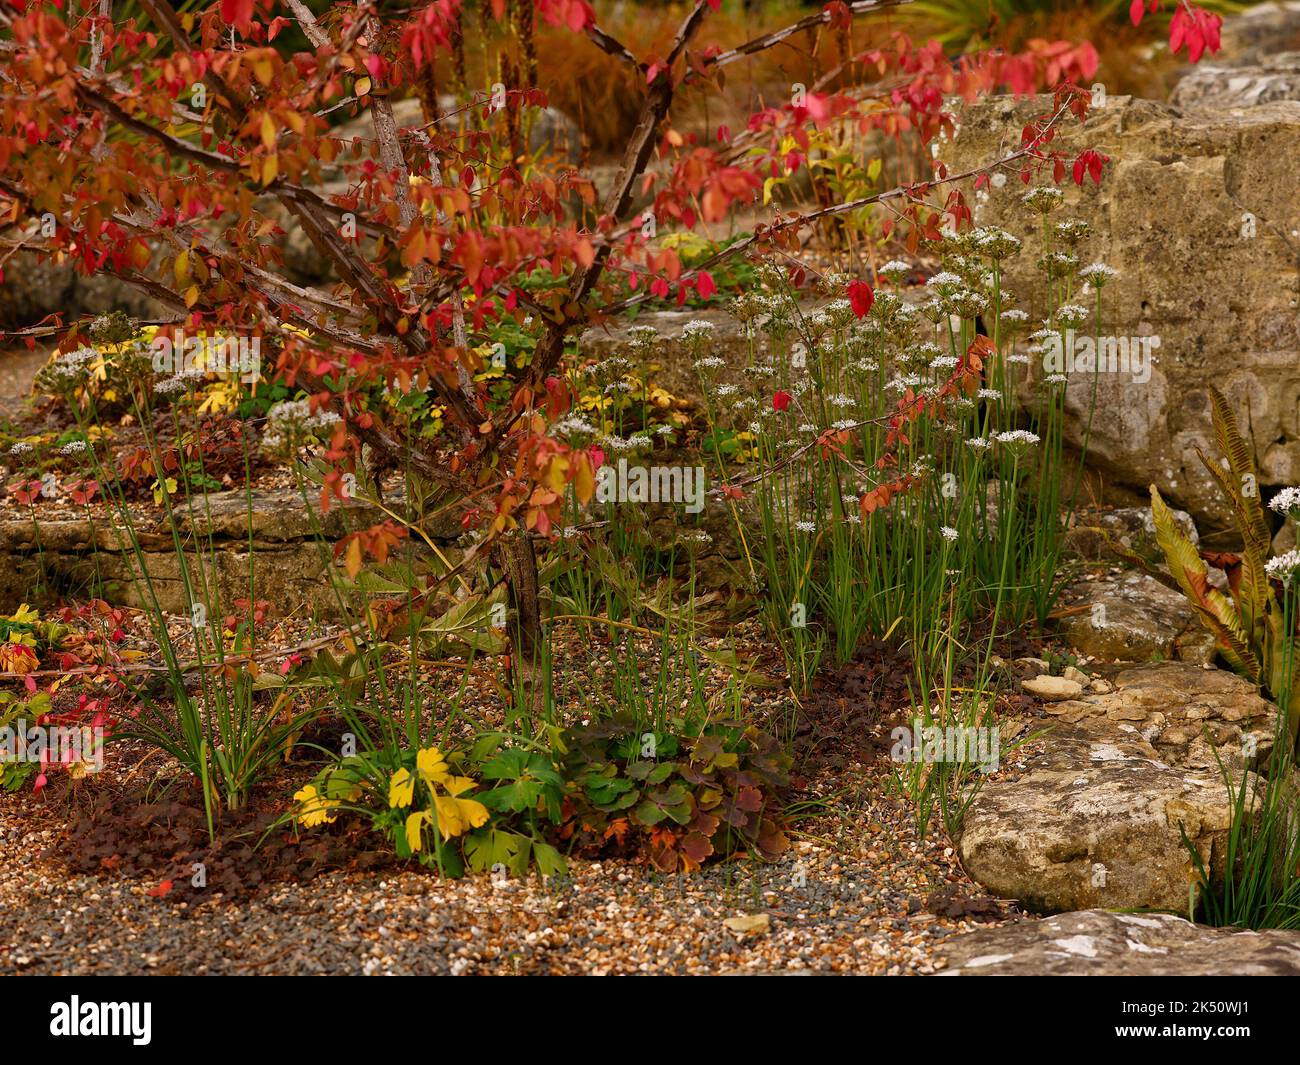 Close up of rockery garden seen planted with autumn colour garden plants in between the gravel and the rocks. Stock Photo